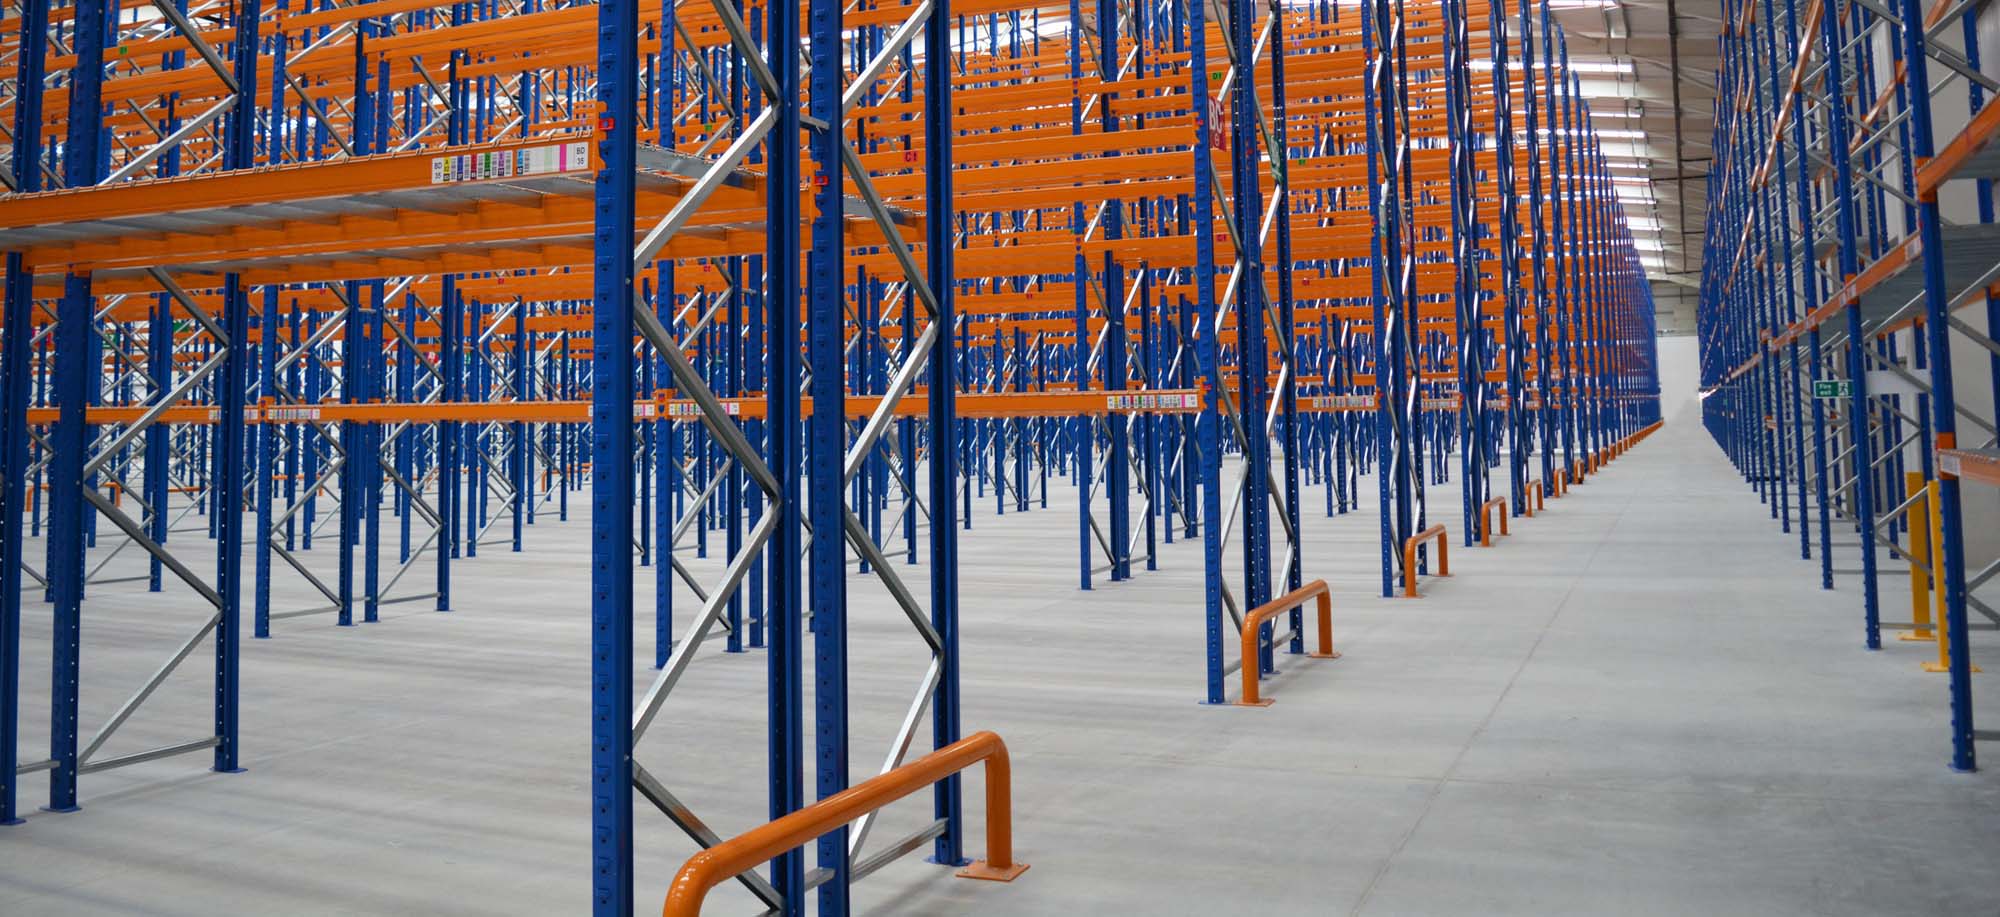 Pallet Racking | What We Do